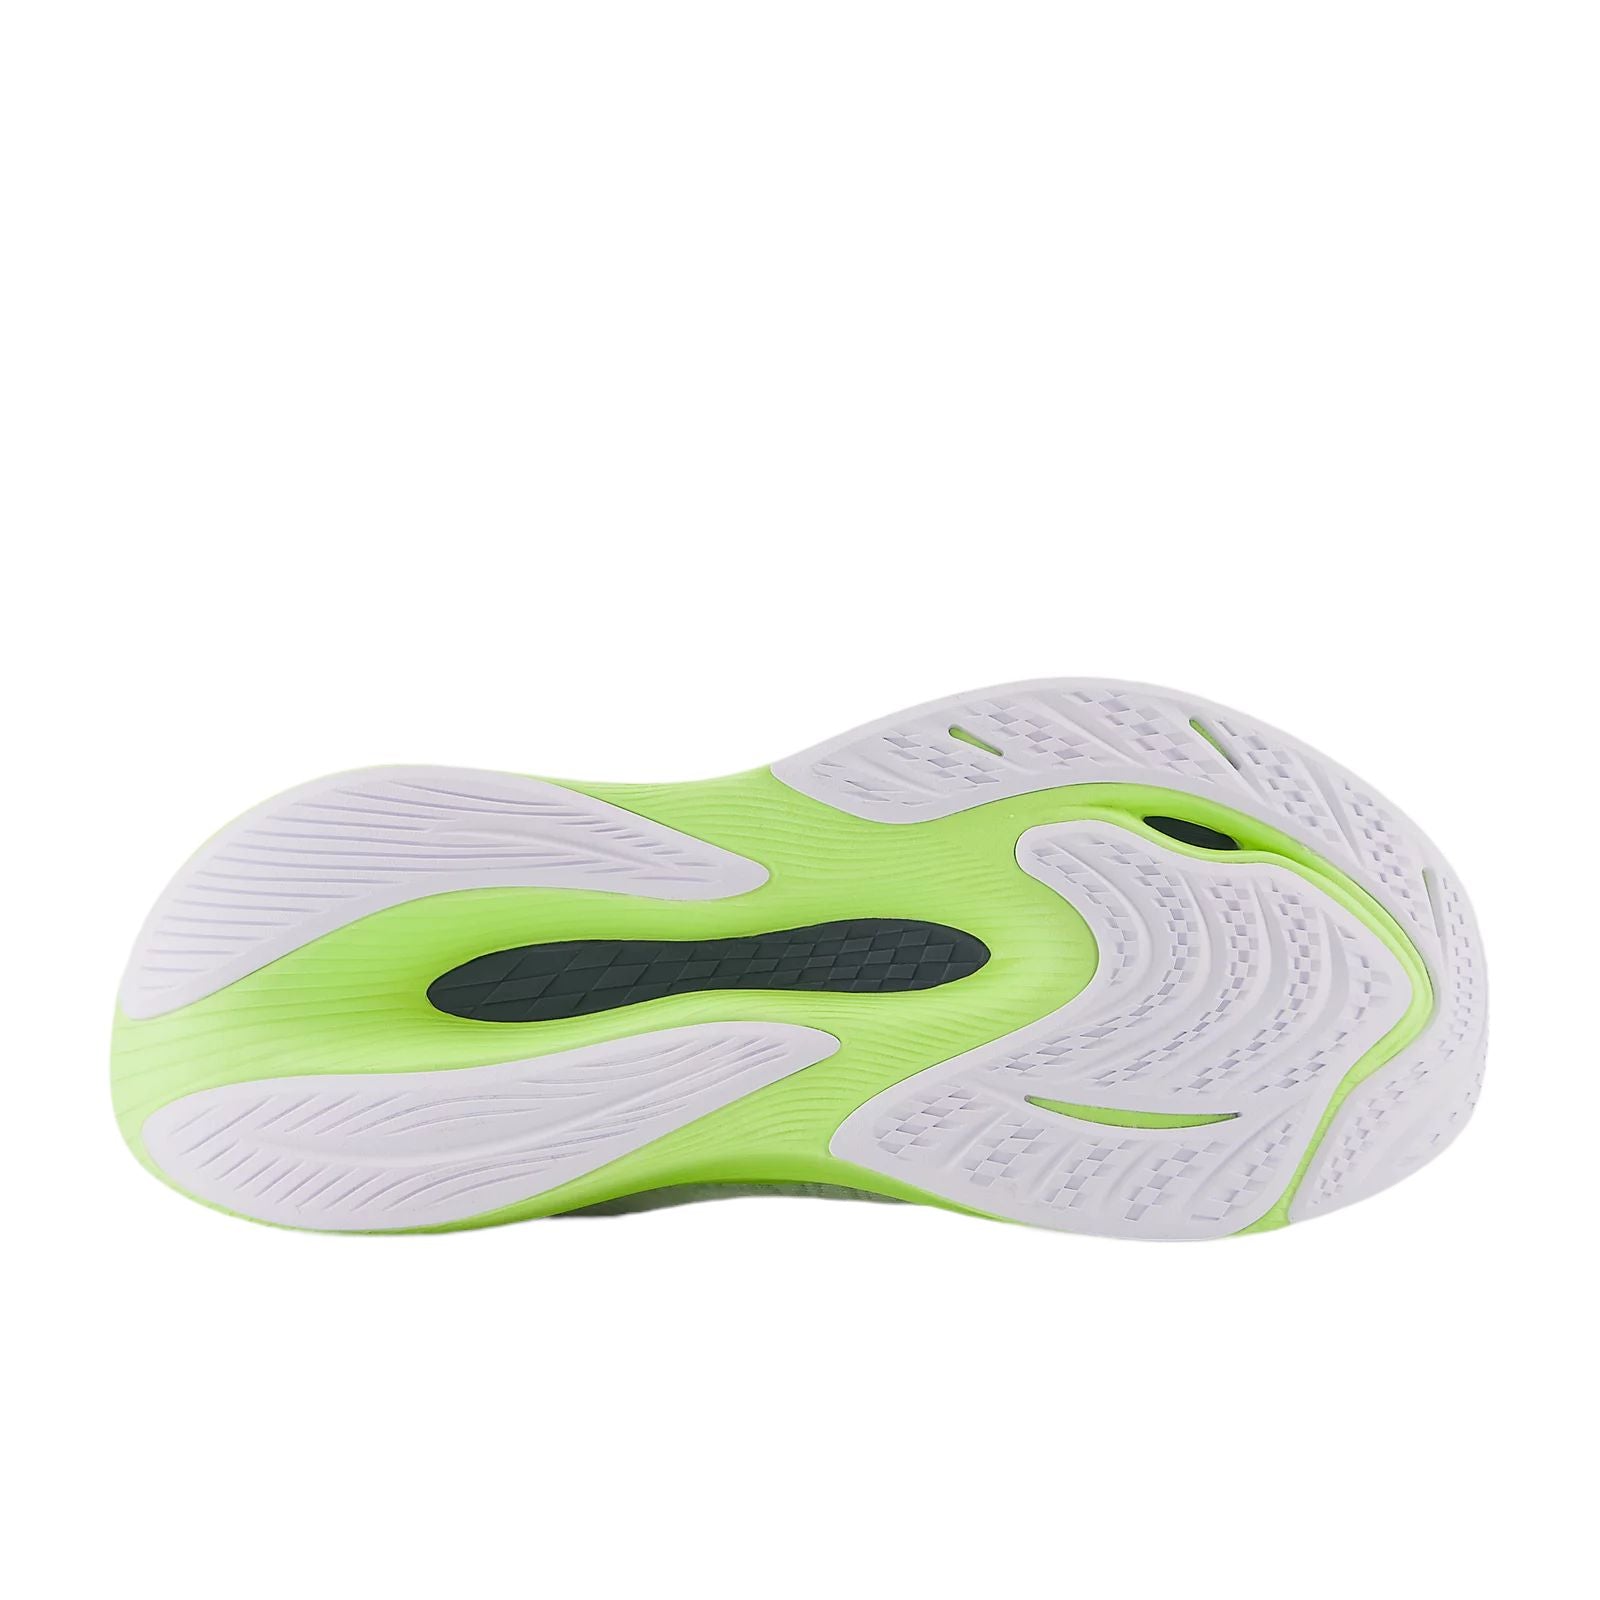 Women's FuelCell Propel v4 Shoes White/Bleached Lime/Graphite 